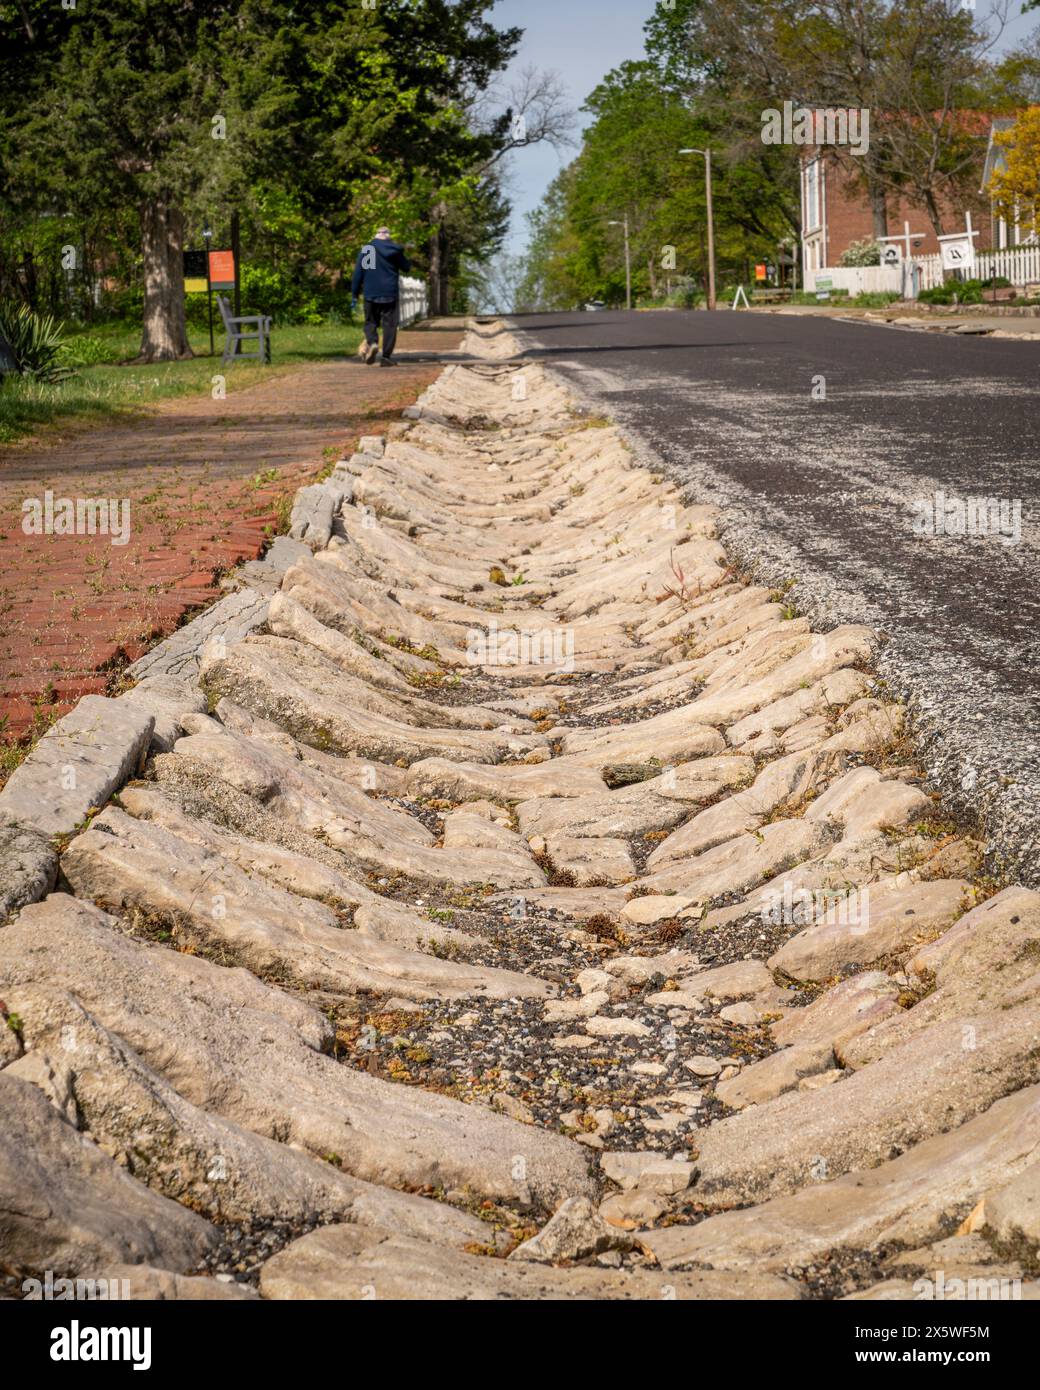 street drain paved with rocks in historic town of Arrow Rock, Missouri Stock Photo